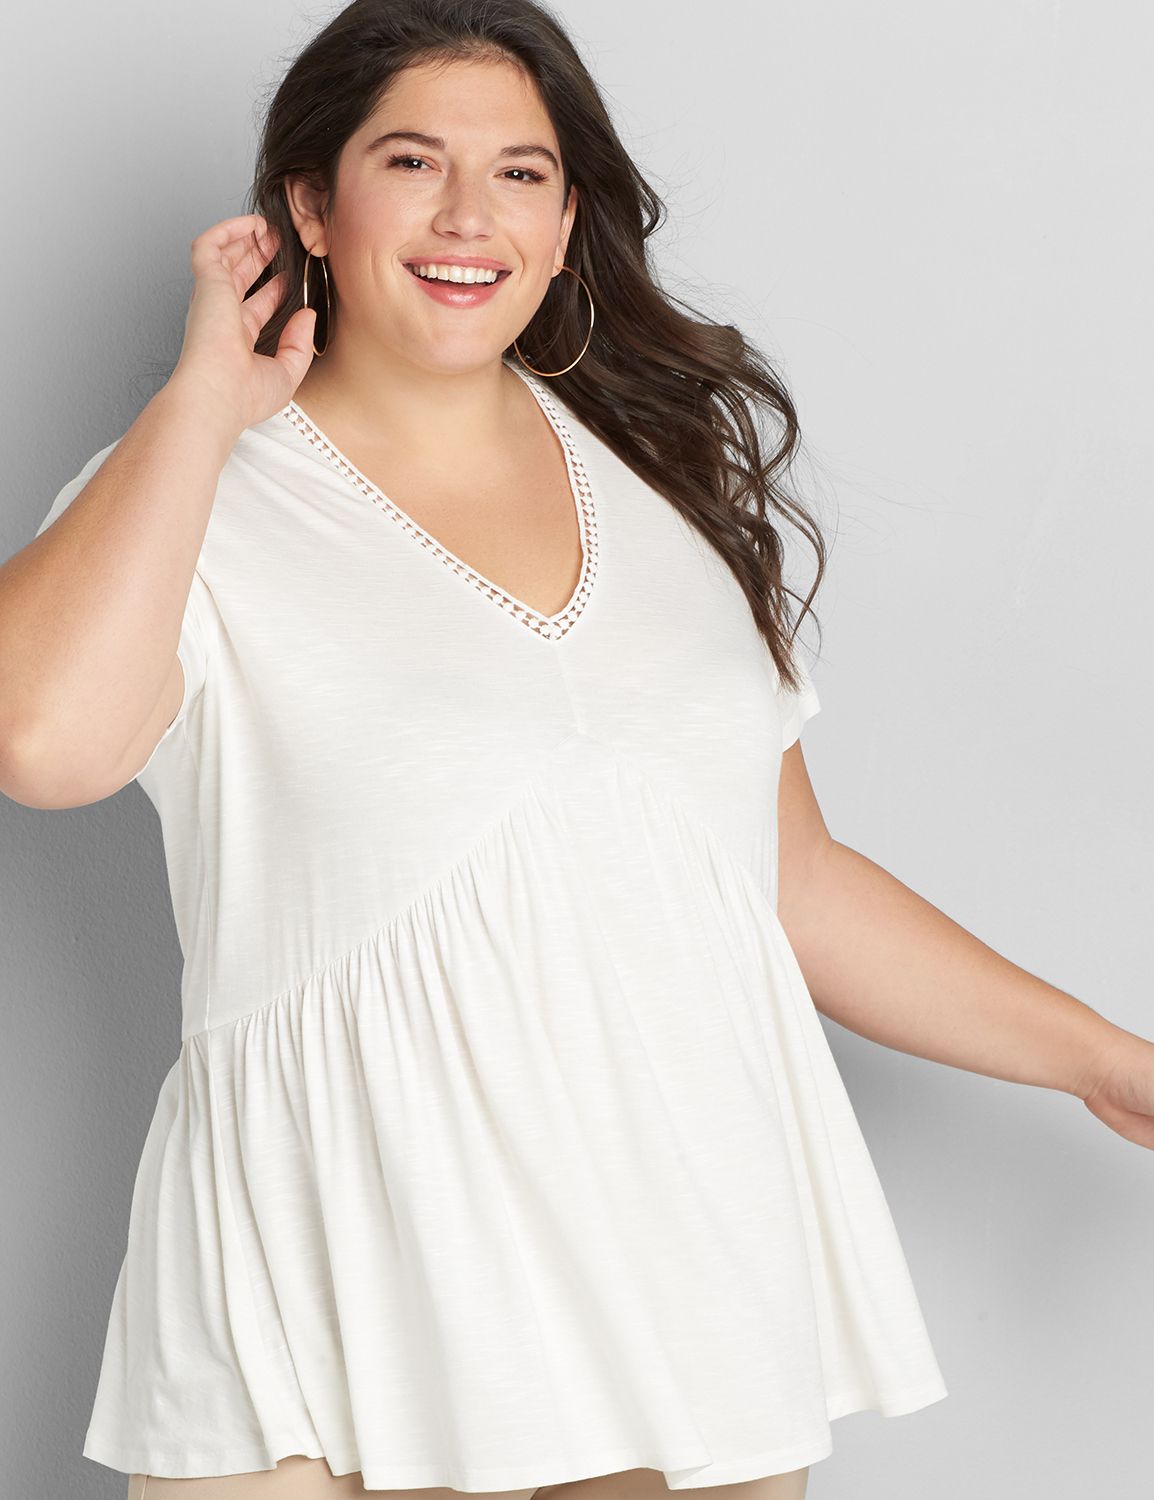 Lane Bryant Women's Embroidered Babydoll Max Swing Tee 38/40 Ivory